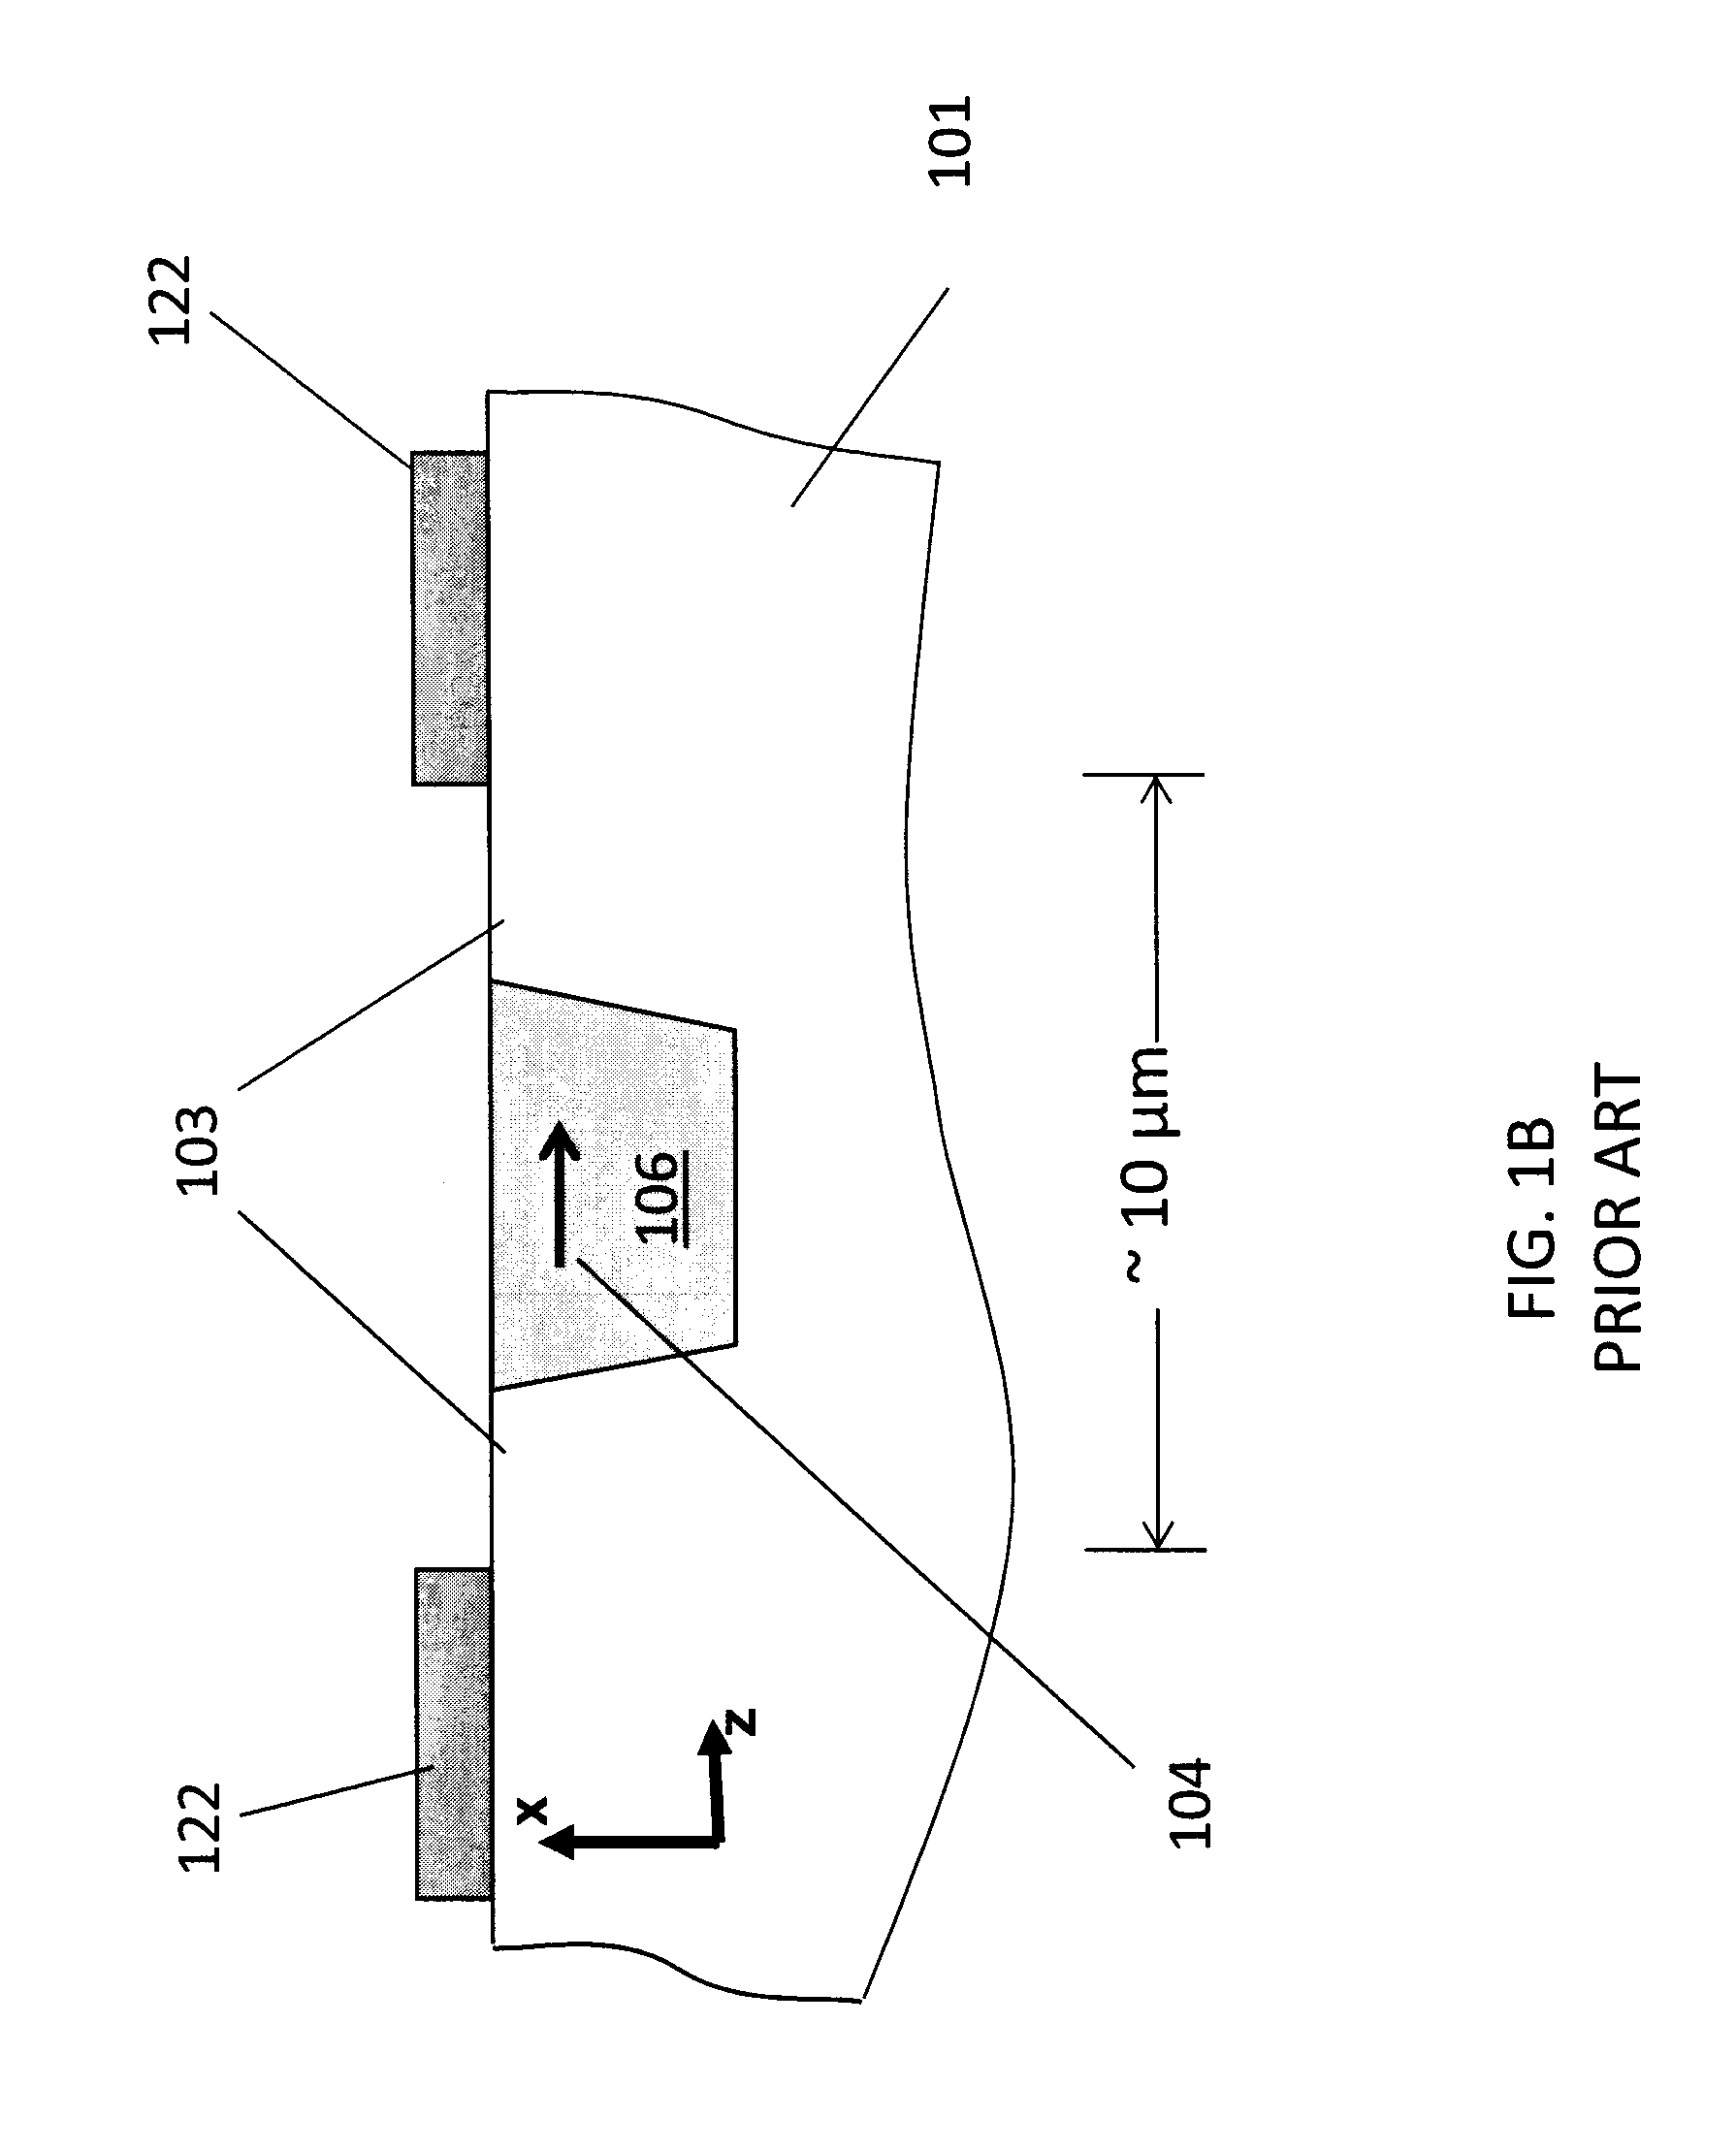 Stable lithium niobate waveguide devices, and methods of making and using same